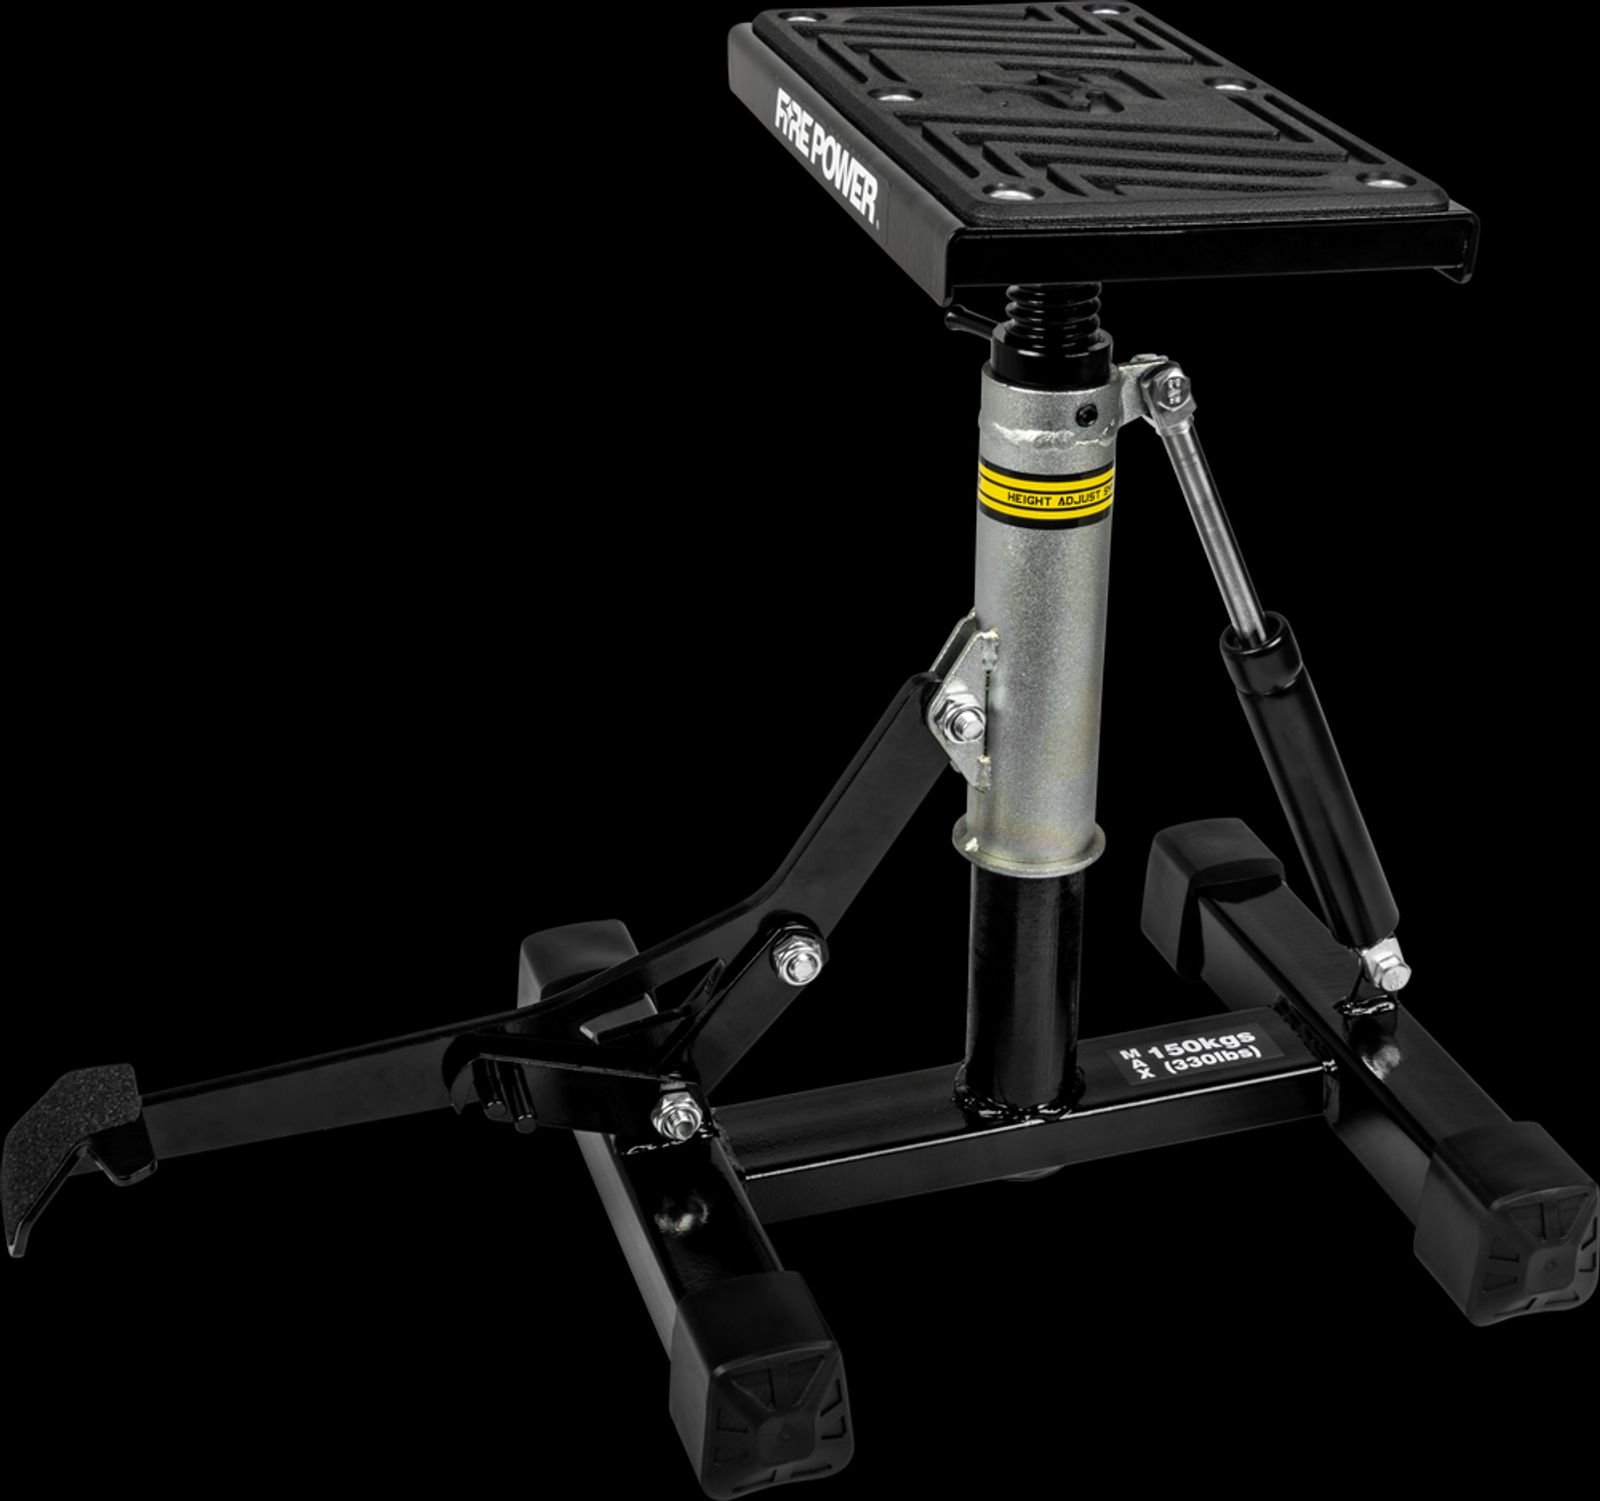 Fire Power Adjustable Lift Stand - Black